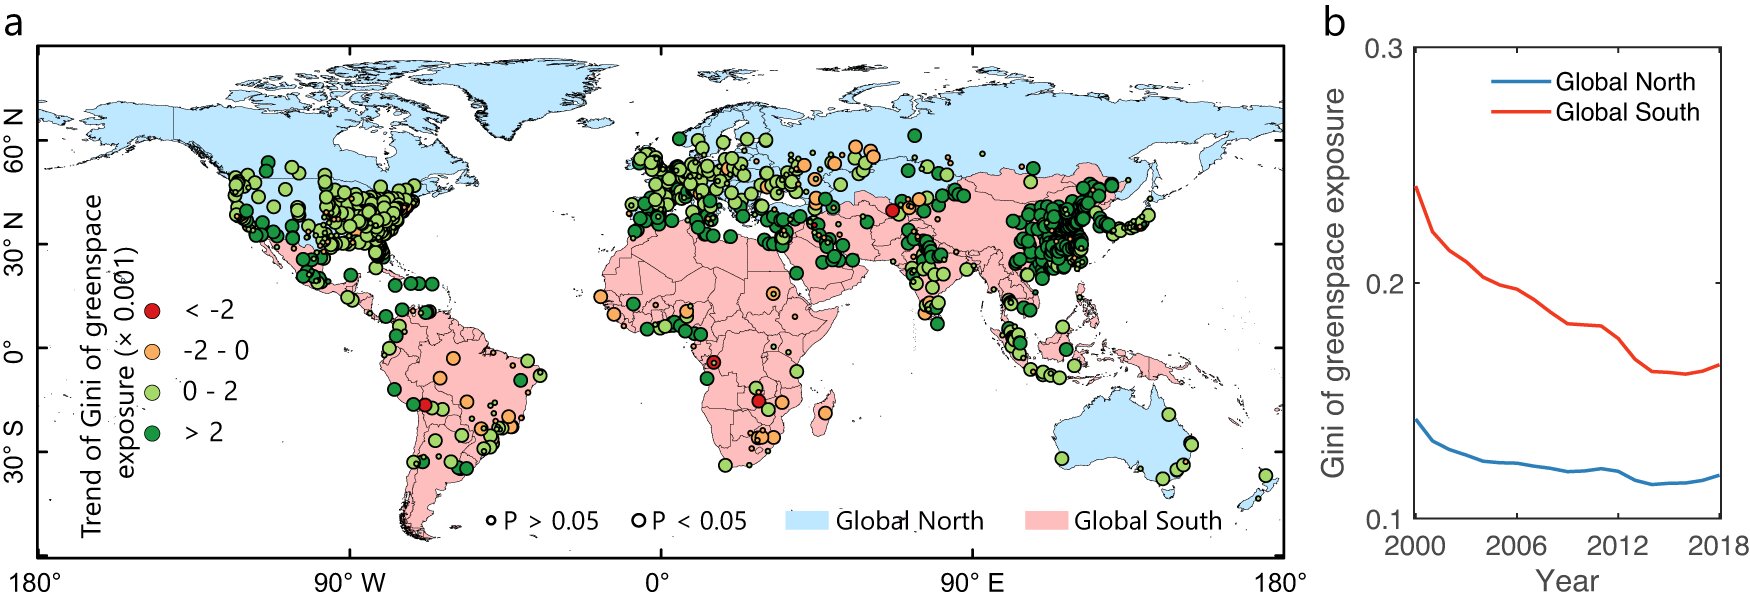 Scholars reveal improved human greenspace exposure equality during 21st century urbanization